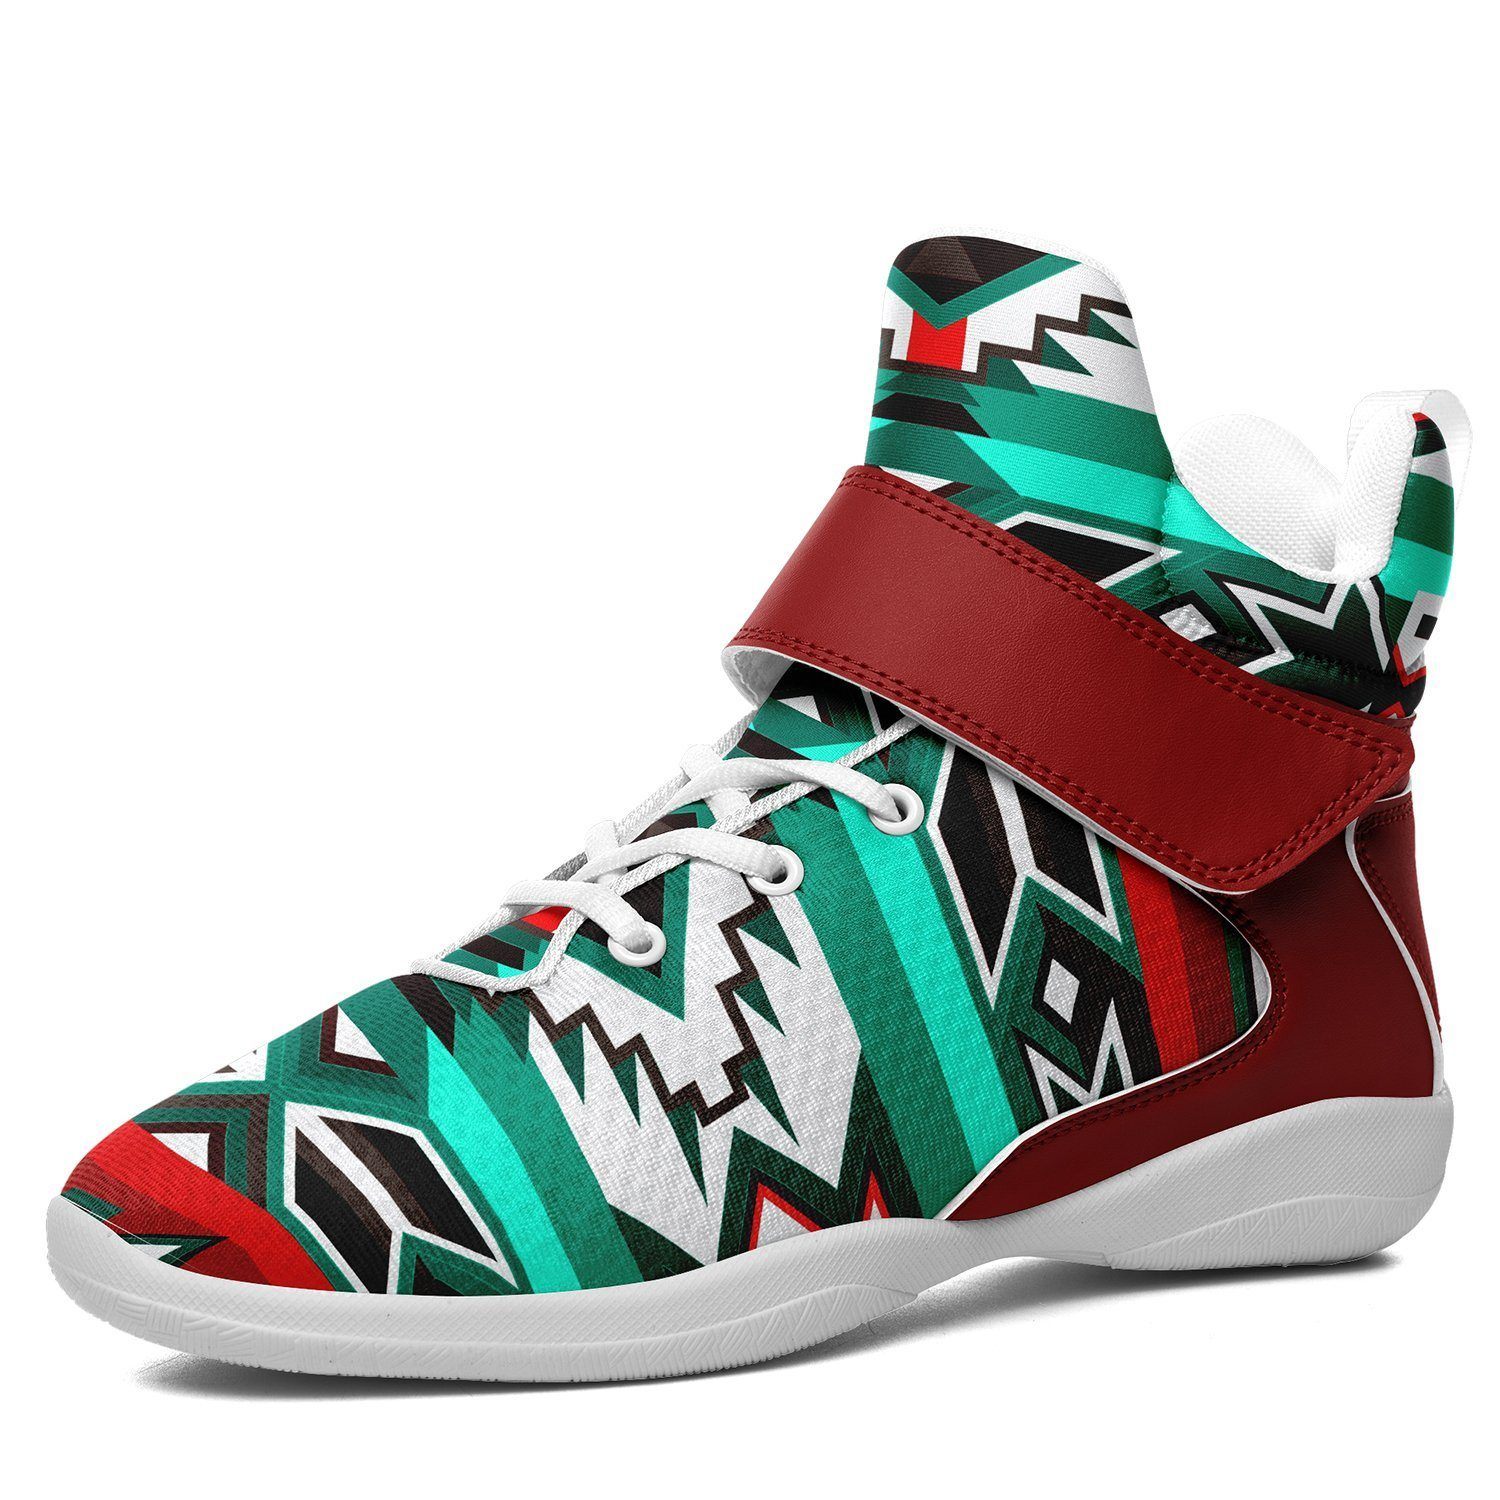 Southwest Journey Ipottaa Basketball / Sport High Top Shoes - White Sole 49 Dzine US Men 7 / EUR 40 White Sole with Dark Red Strap 